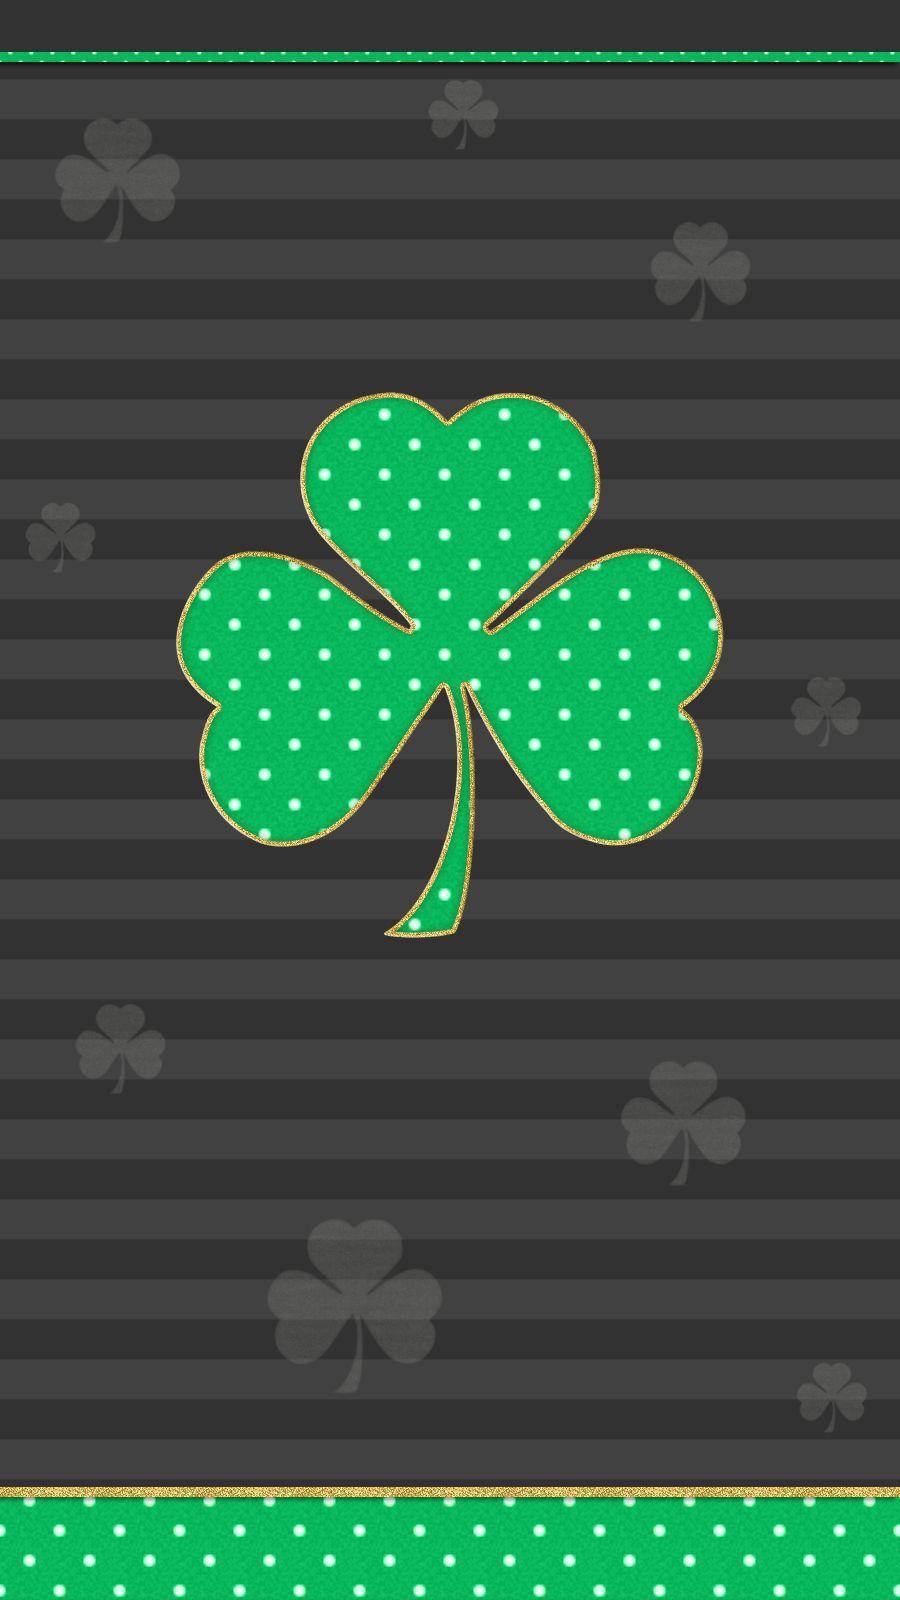 iPhone Wall: St.Patrick's Day tjn. iPhone Walls: St. Patrick's Day